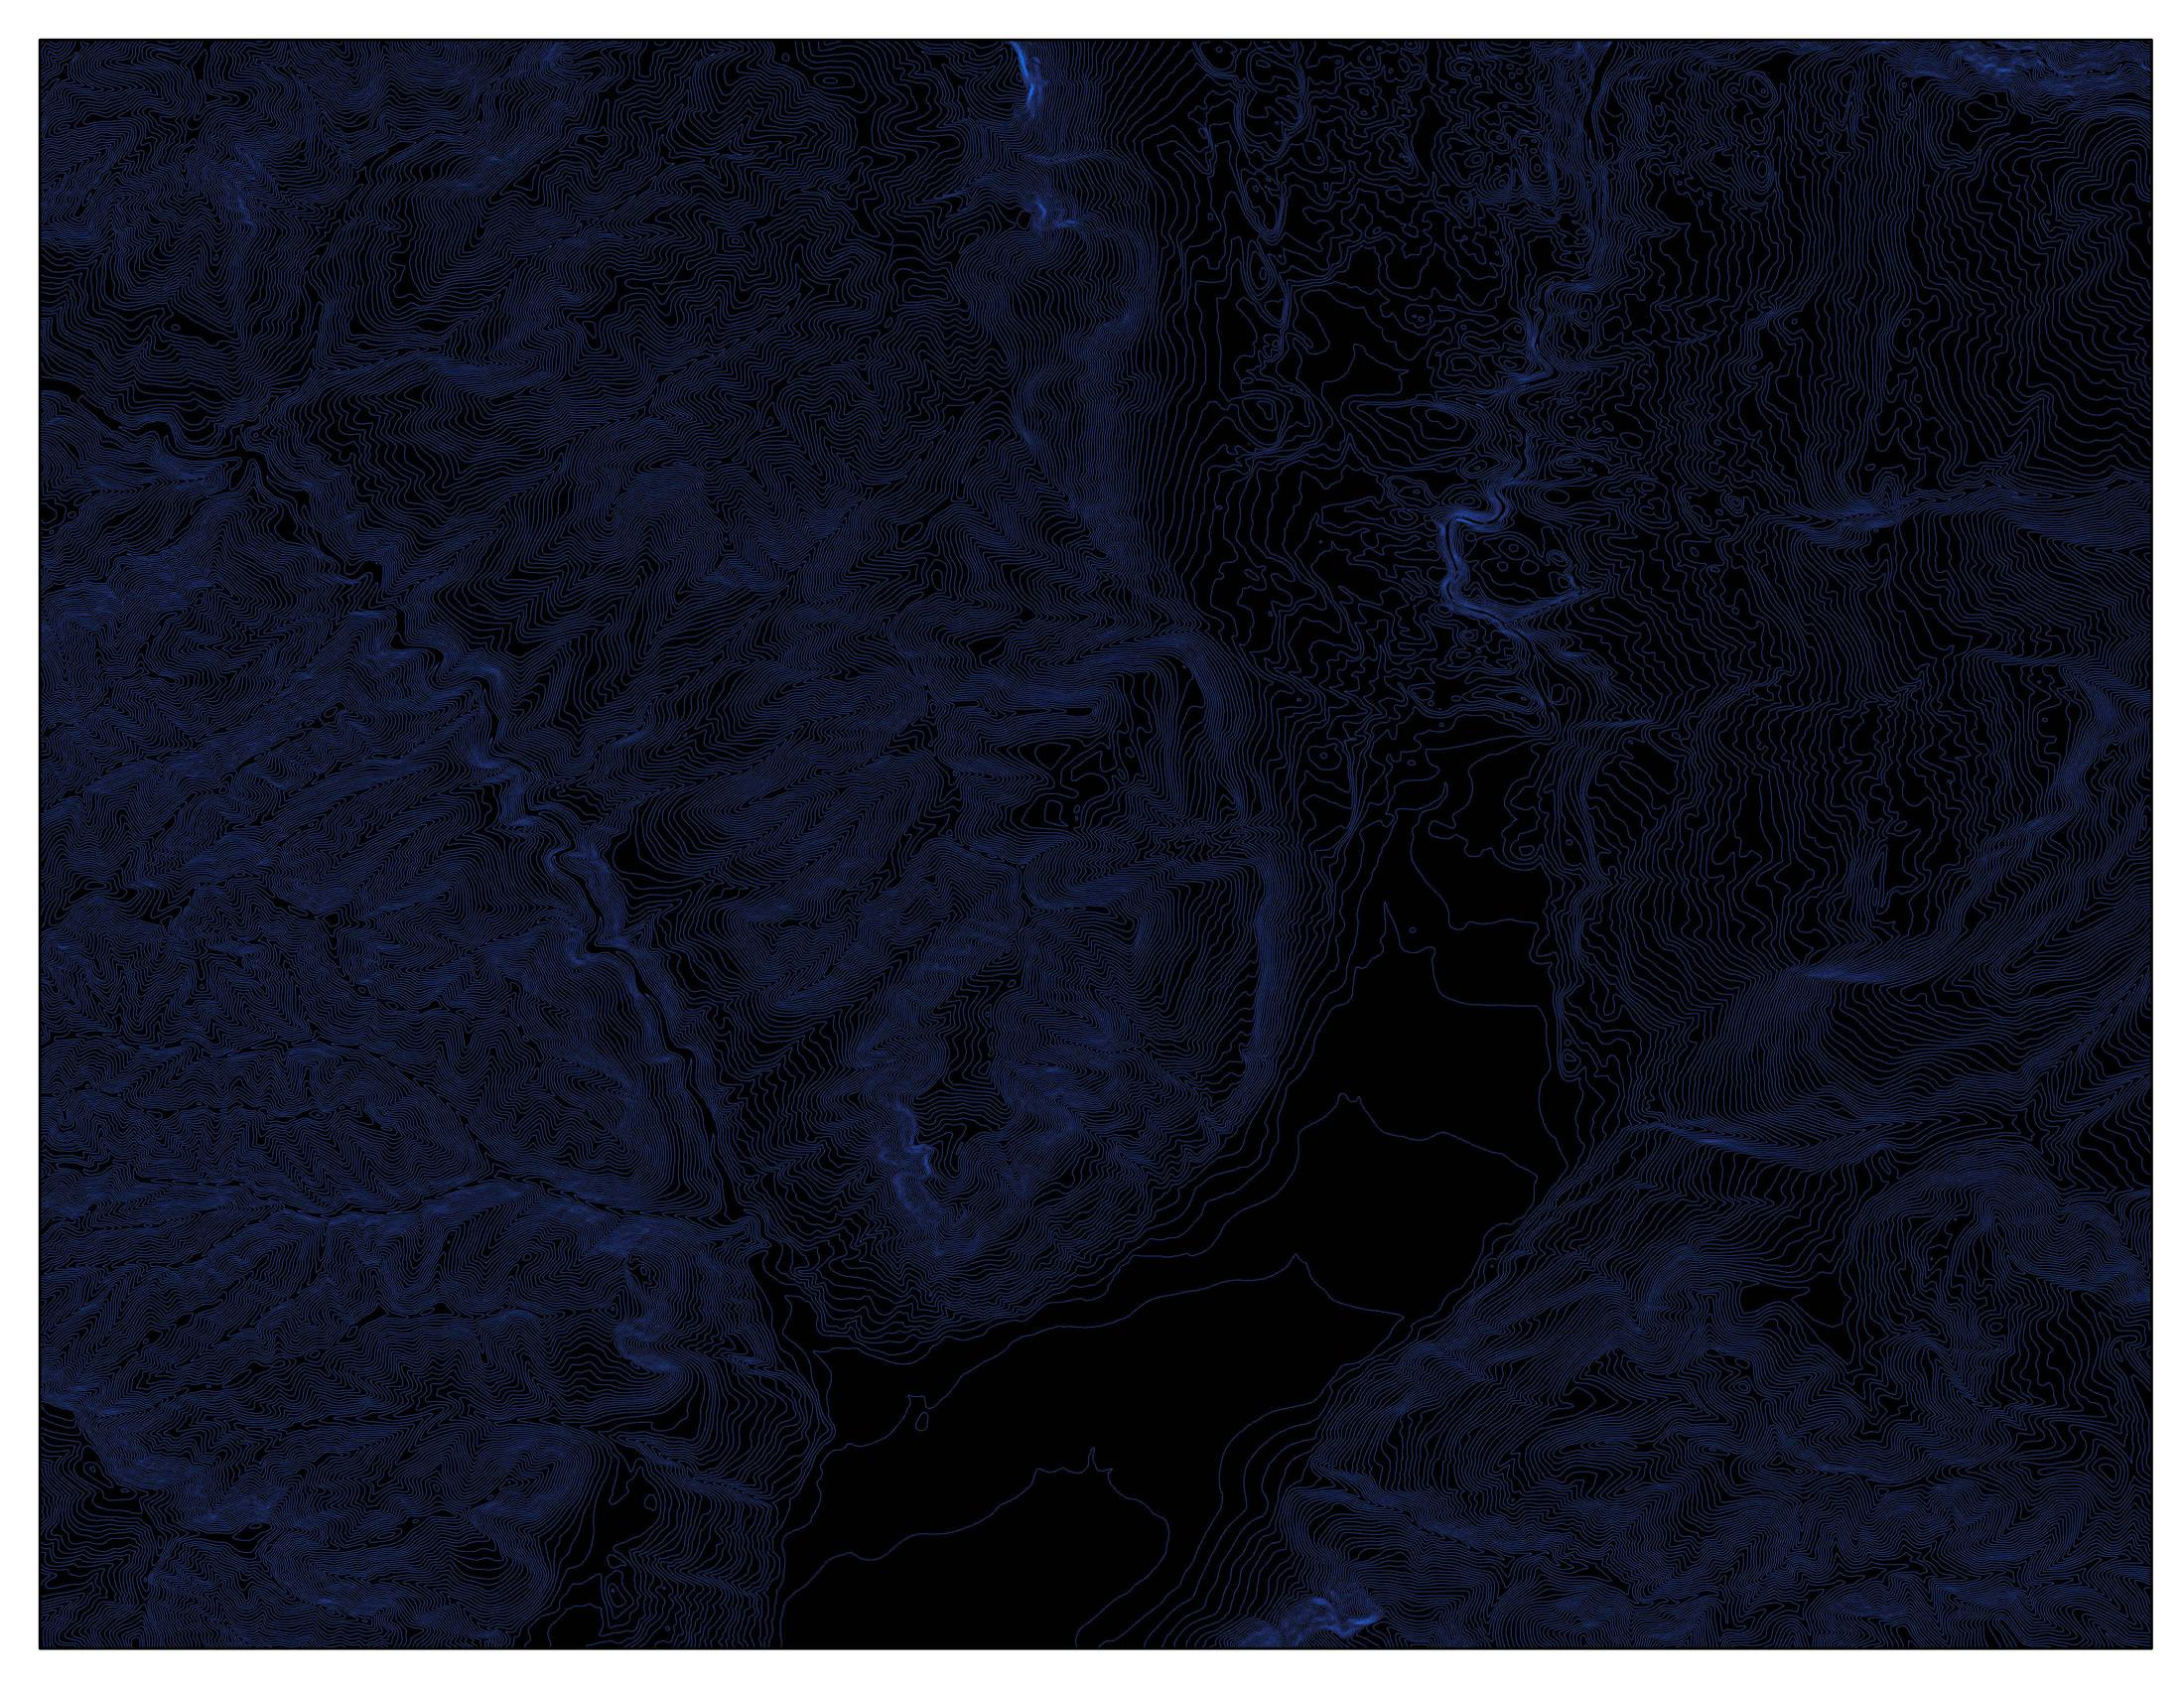 Some Low Light Colorado Topography Based Wallpaper I Made In ArcMap